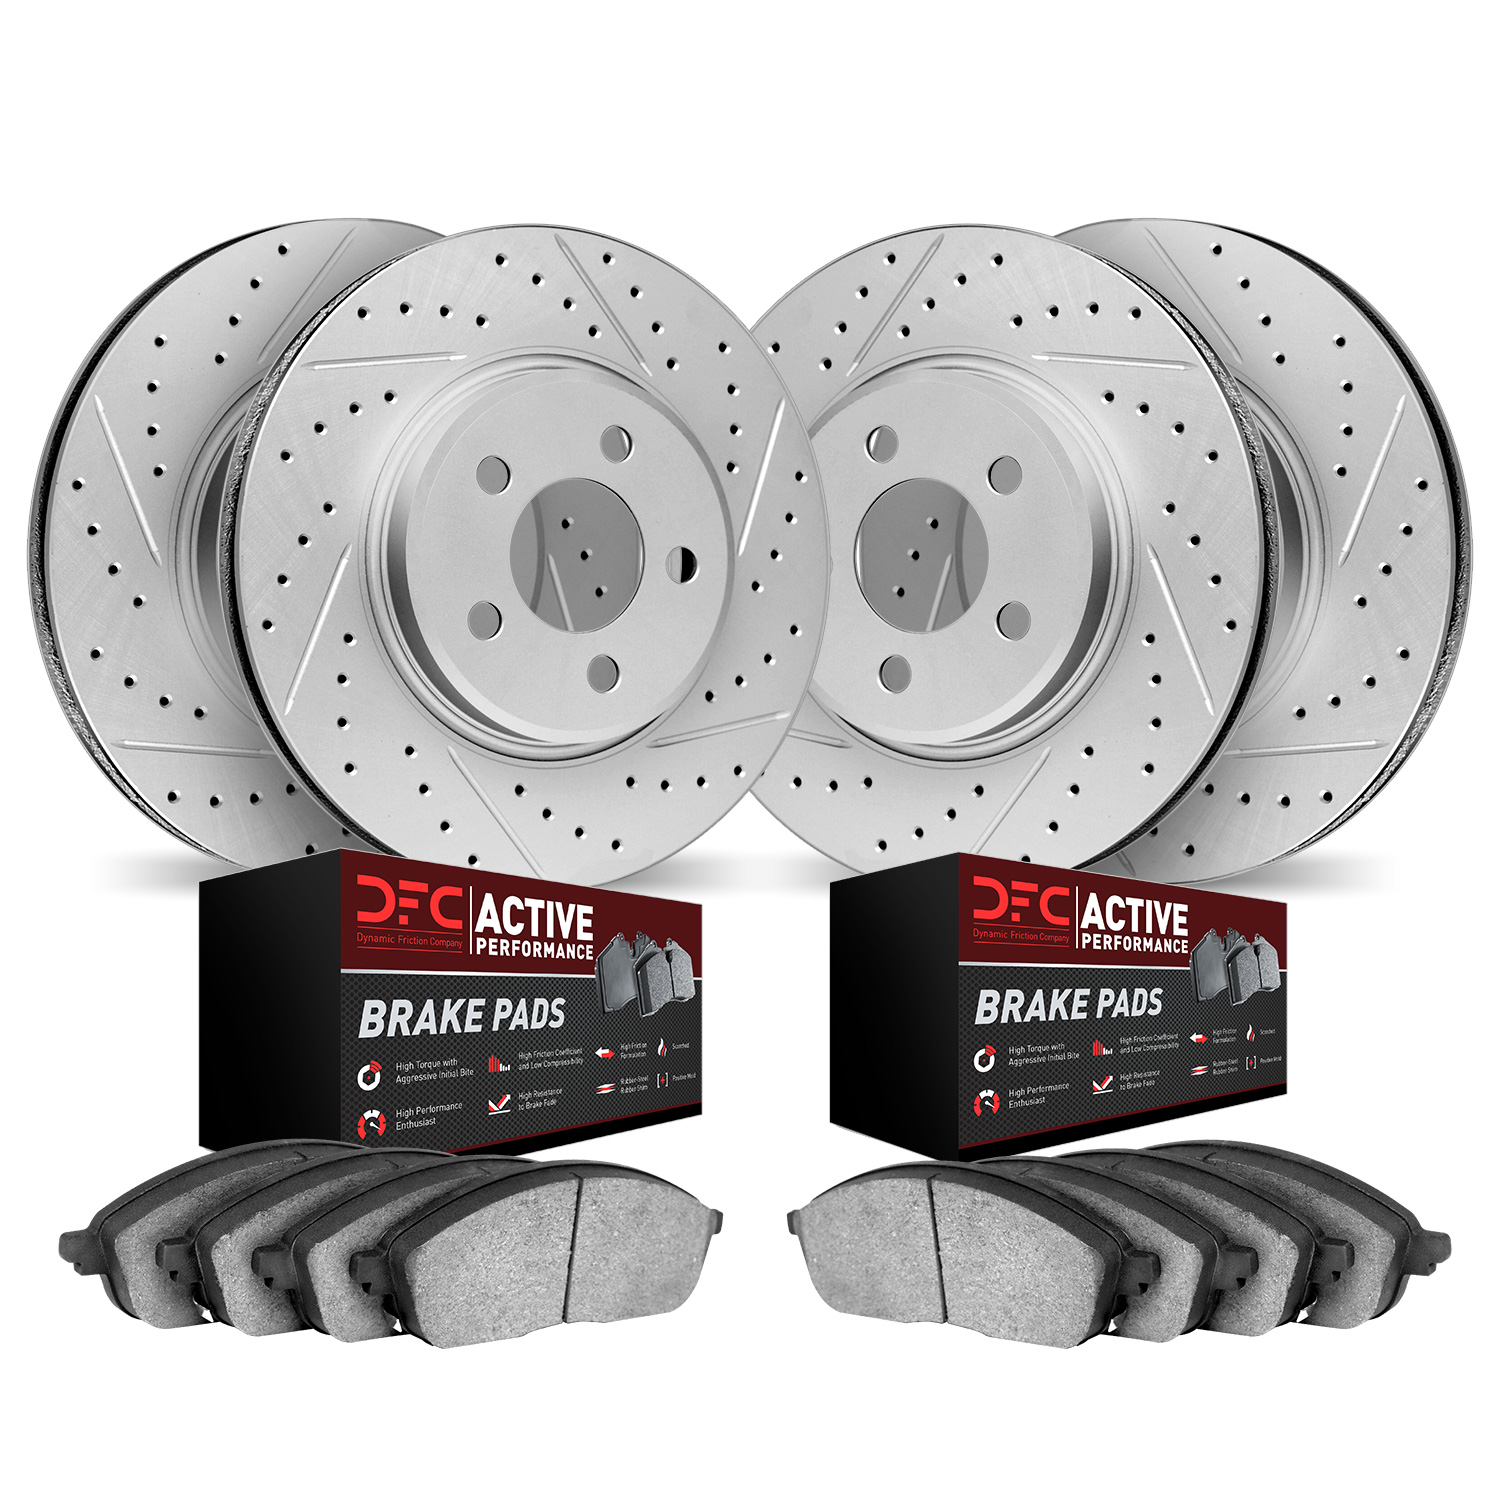 2704-45003 Geoperformance Drilled/Slotted Brake Rotors with Active Performance Pads Kit, 2010-2015 GM, Position: Front and Rear